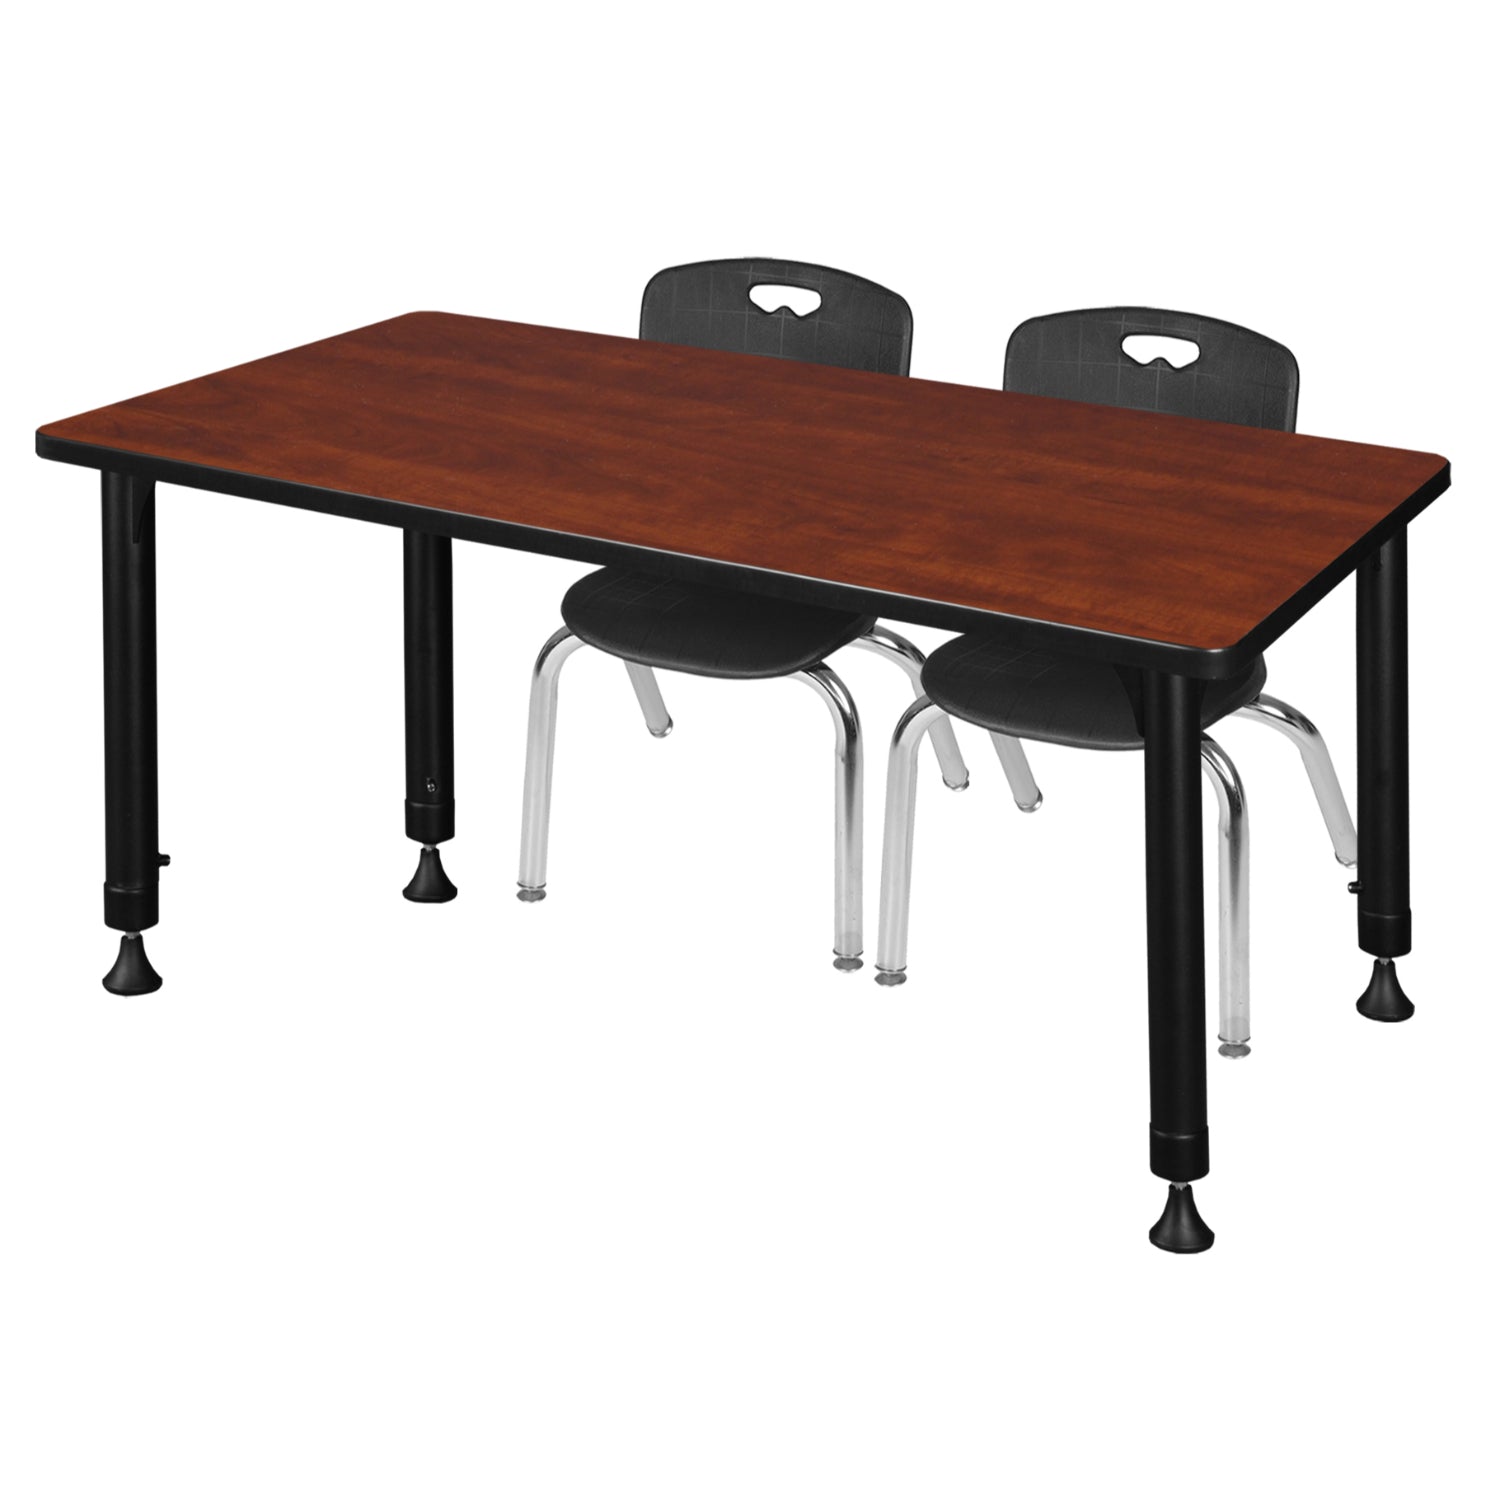 Kee Classroom Table and Chair Package, Kee 48" x 30" Rectangular Adjustable Height Table with 2 Andy 12" Stack Chairs